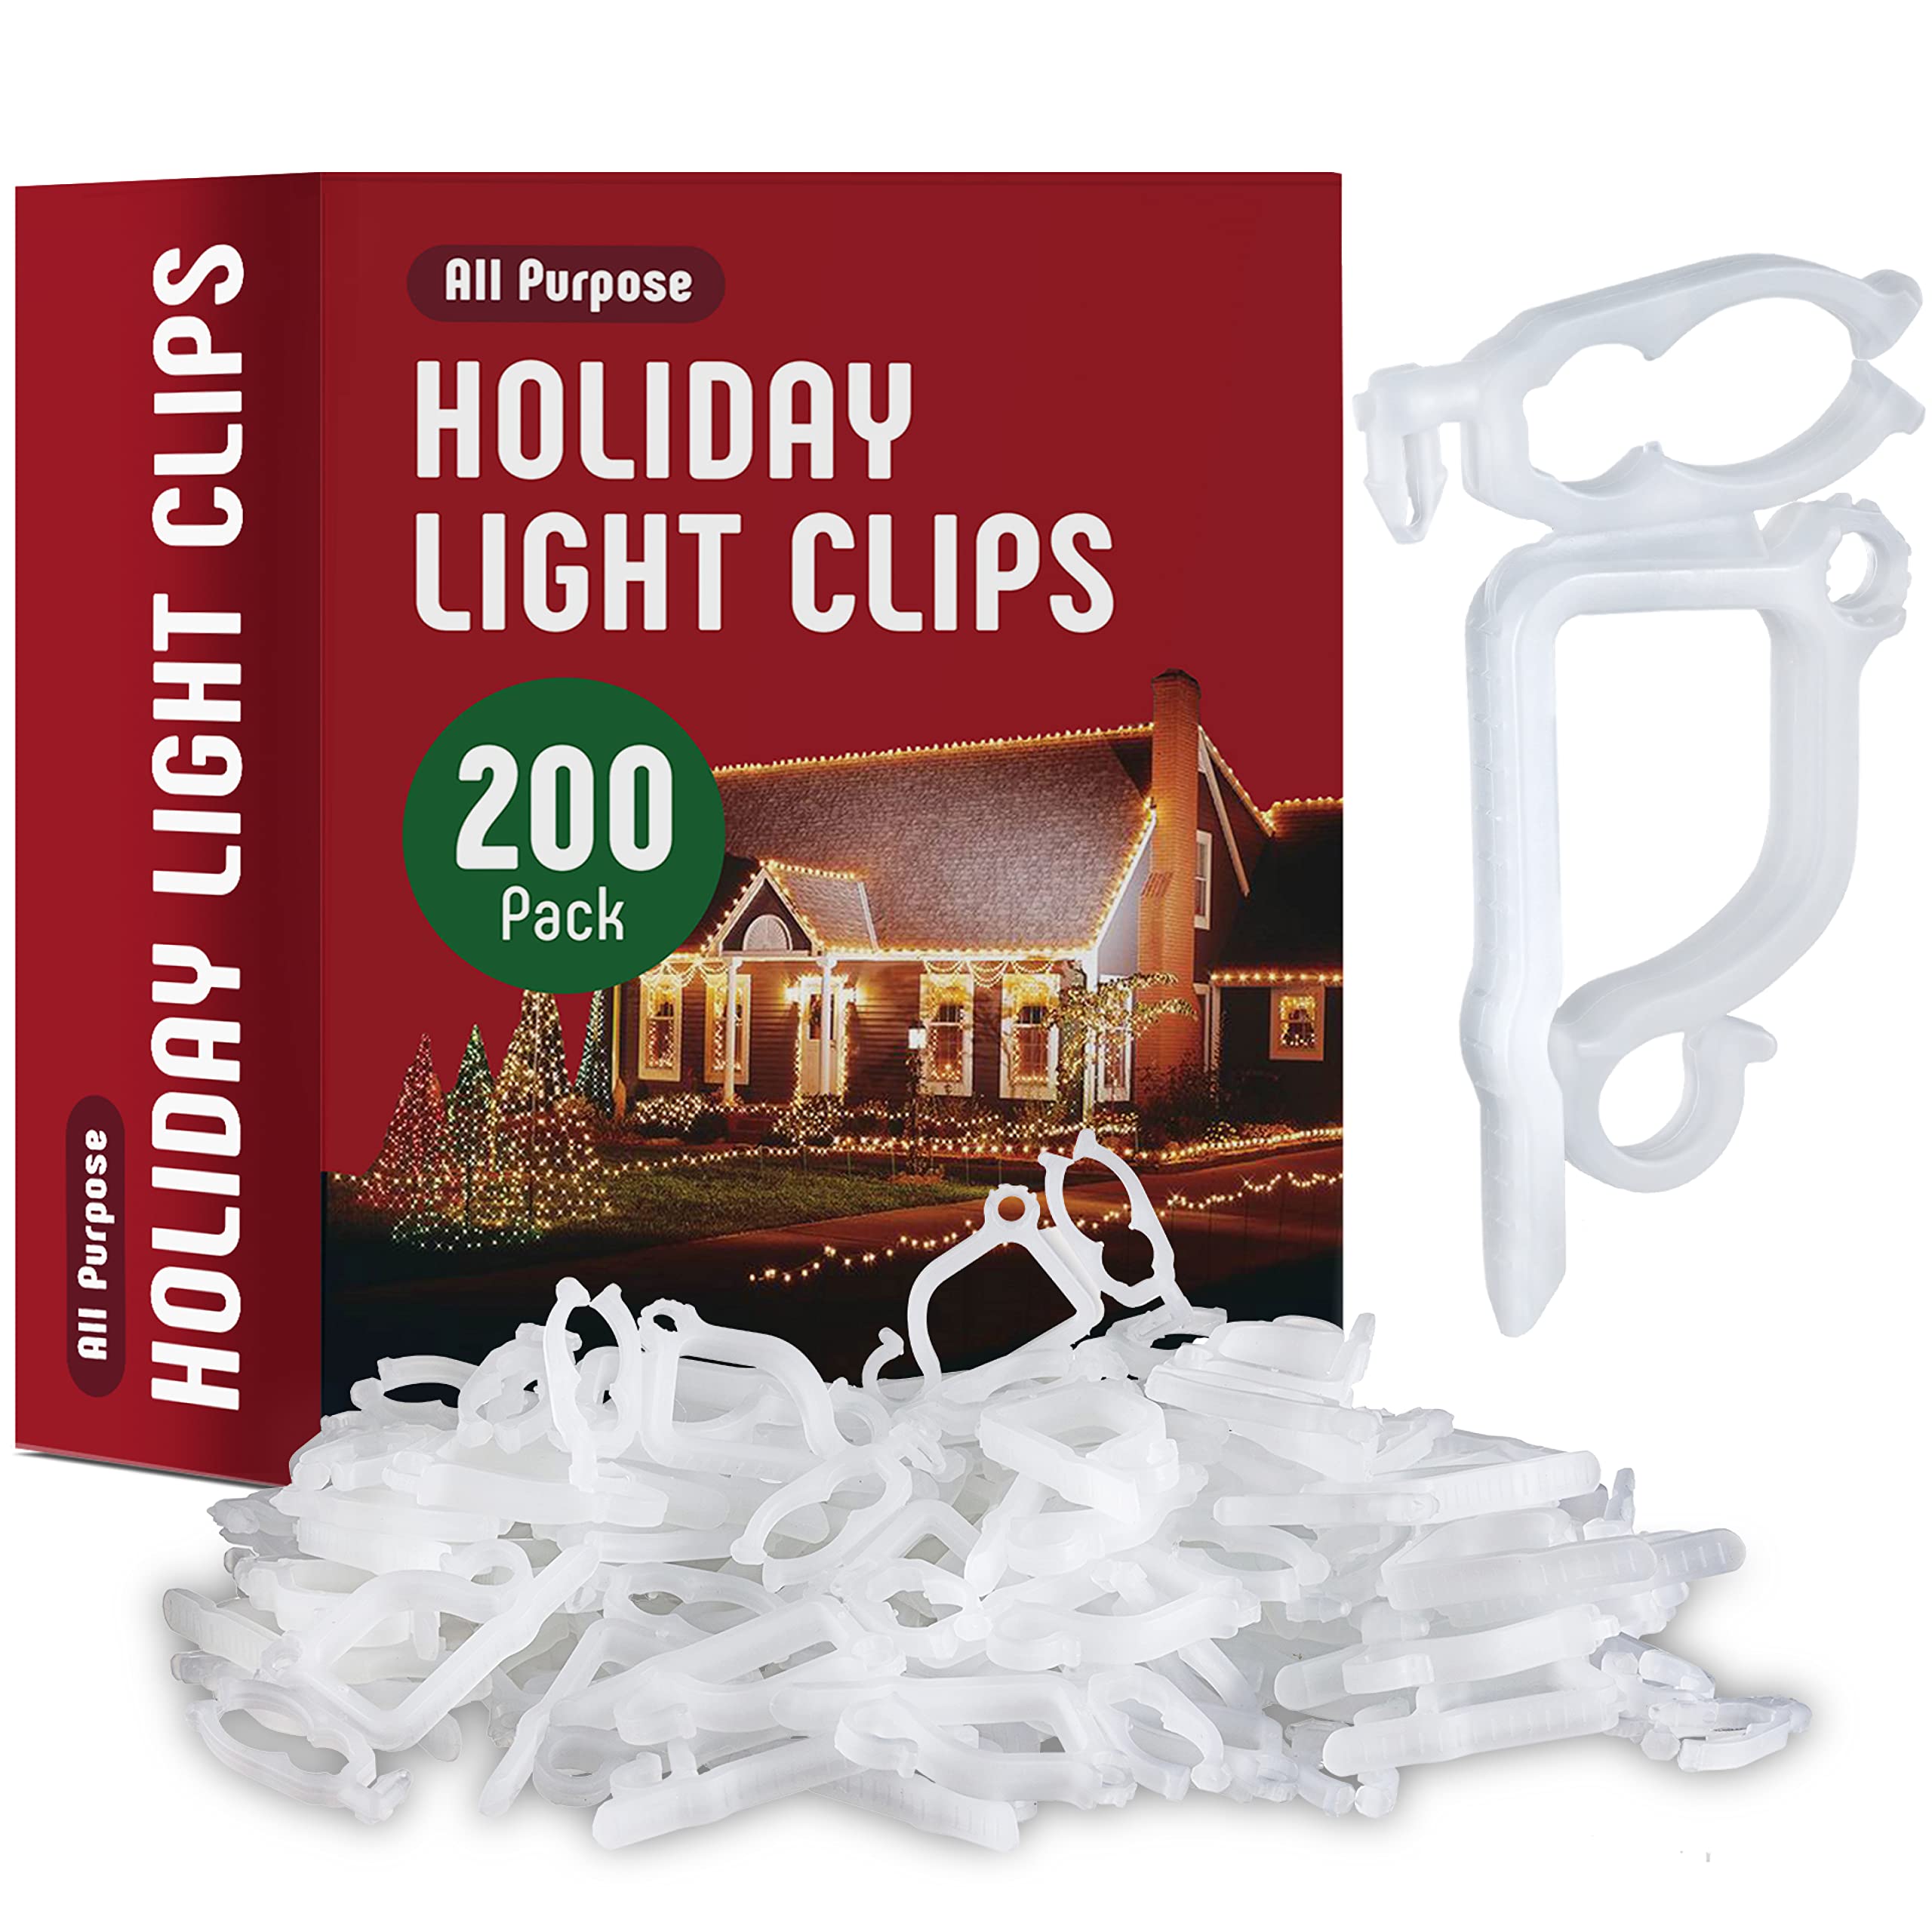 All-Purpose Holiday Light Clips [Set of 200] Christmas Light Clips, Outdoor Light Clips - Mount to Shingles & gutters - Works with Mini, C6, C7, C9, Rope, Icicle Lights - No Tools Required - USA Made